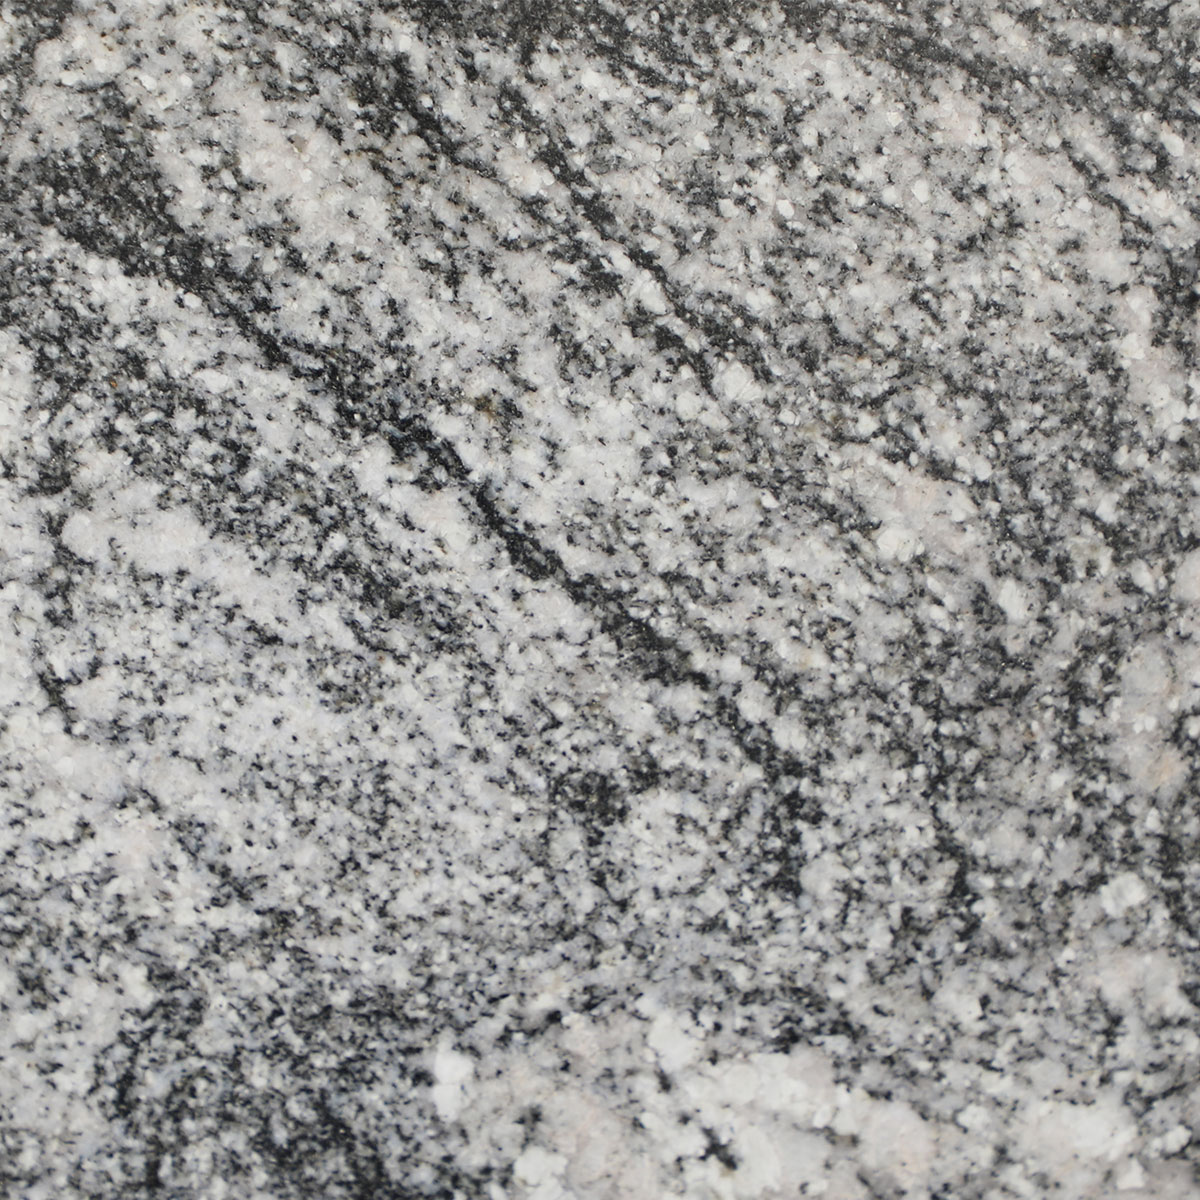 static/products/marbleSlabs/products/GW11.jpg 